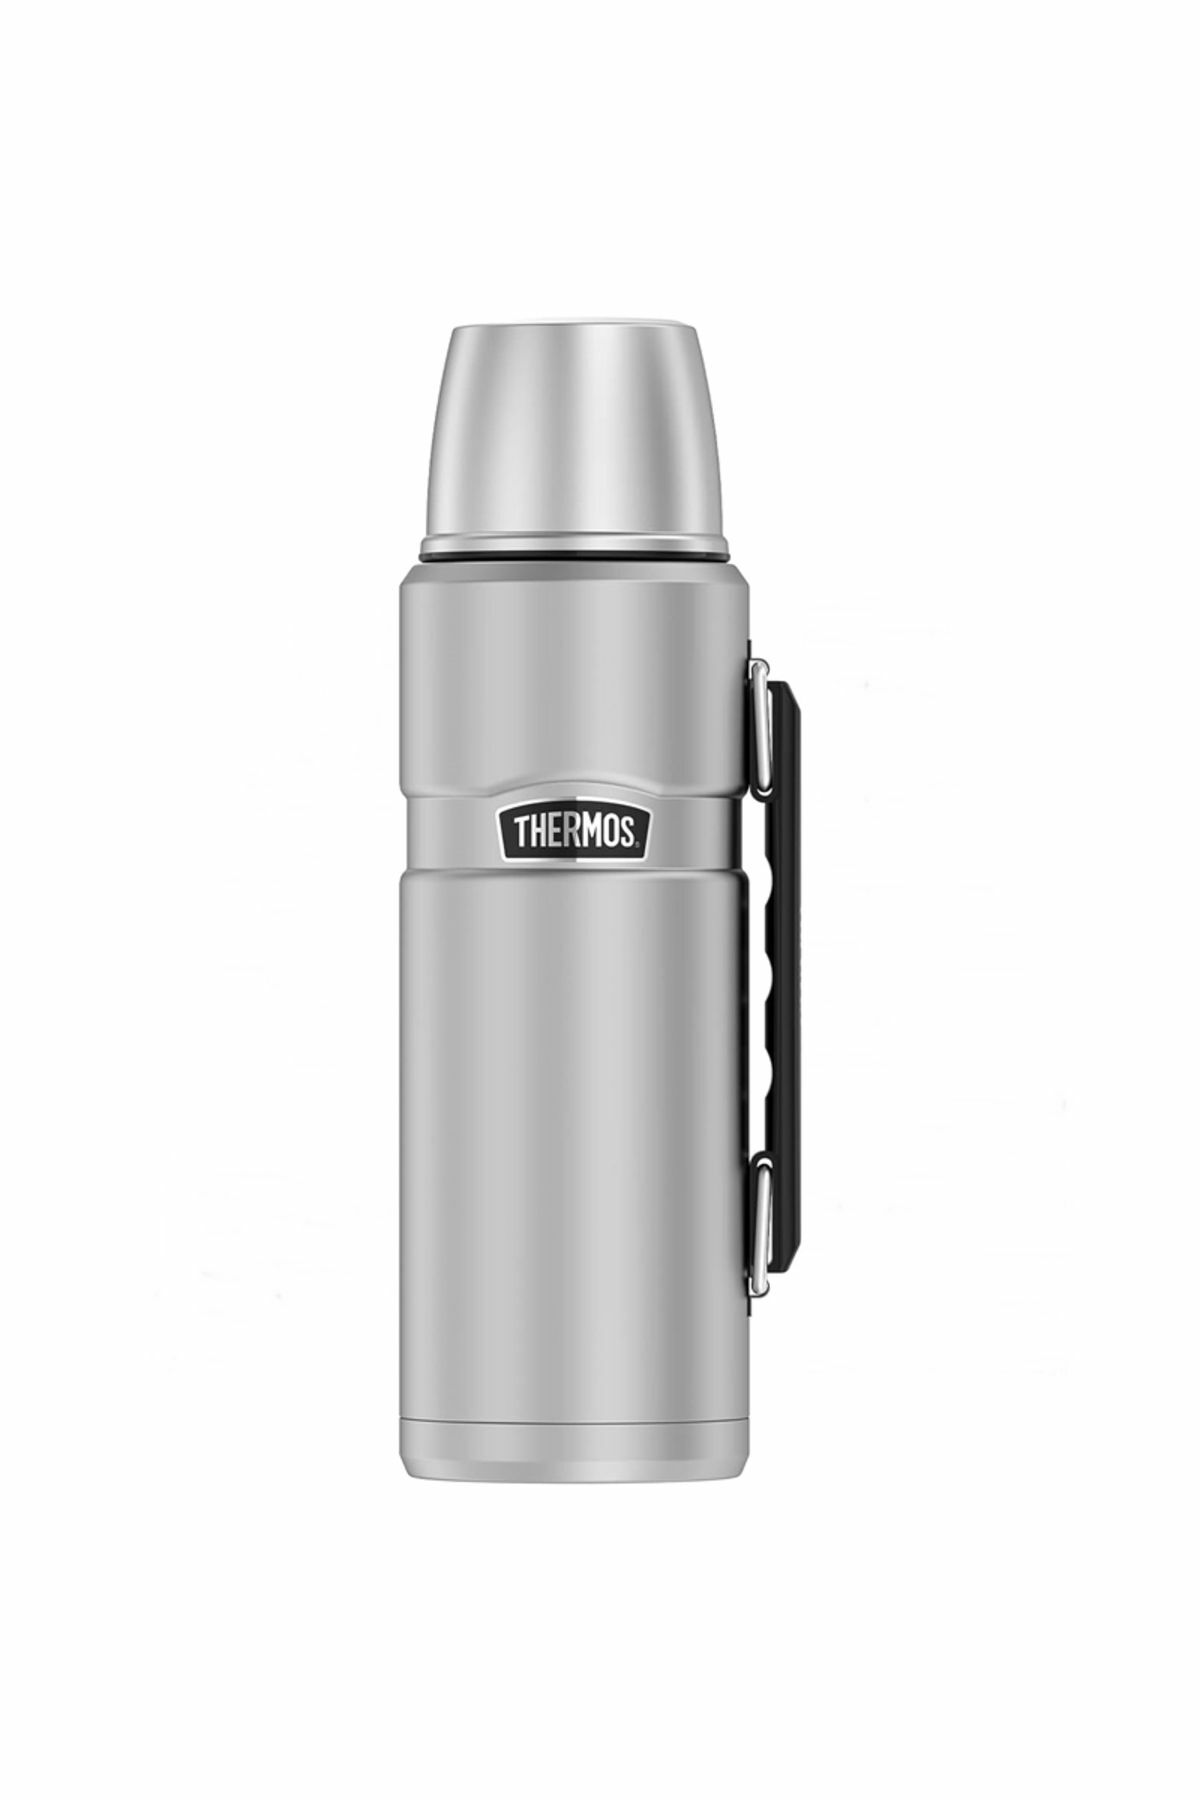 Thermos SK2010 Stainless King Large 1.2 Lt Matte Stainless Steel 163963-AK